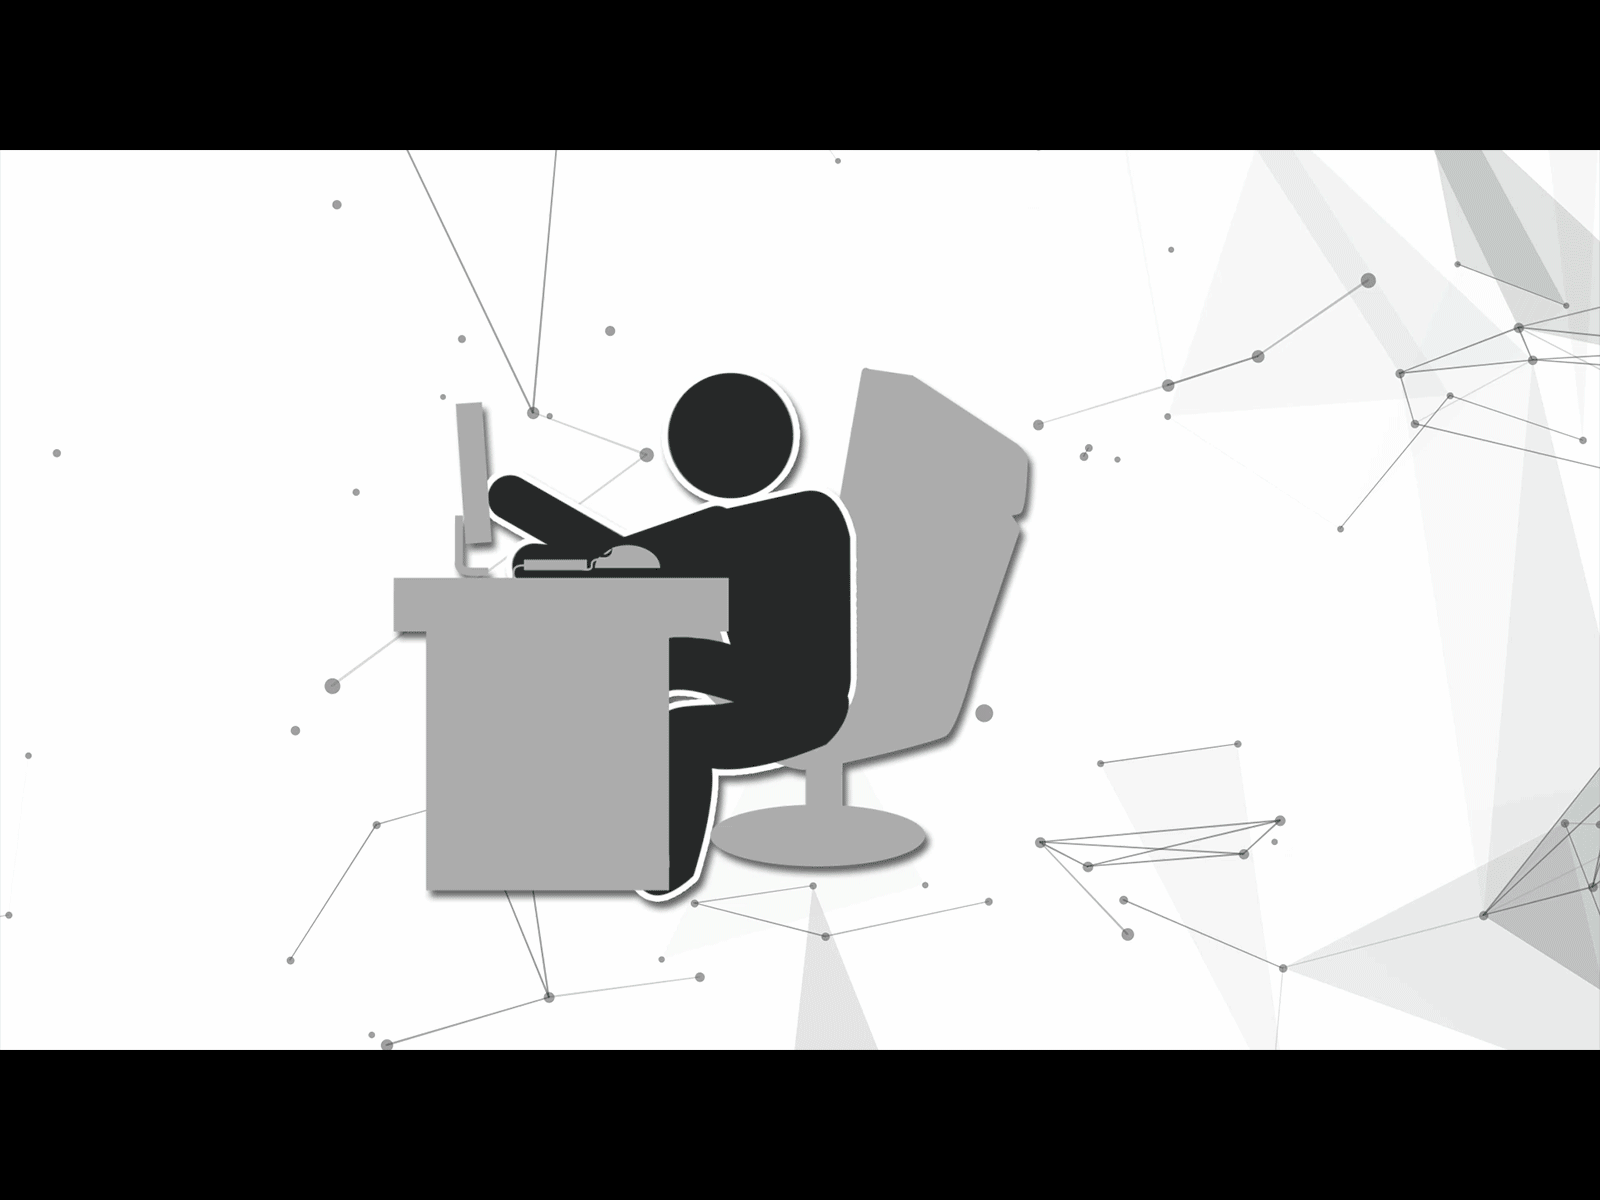 relax 2d 2danimation after effects animation at work explainer explainer animation explainer video explainervideo flat office office work promo relax rest shapes vector анимация отдых офис